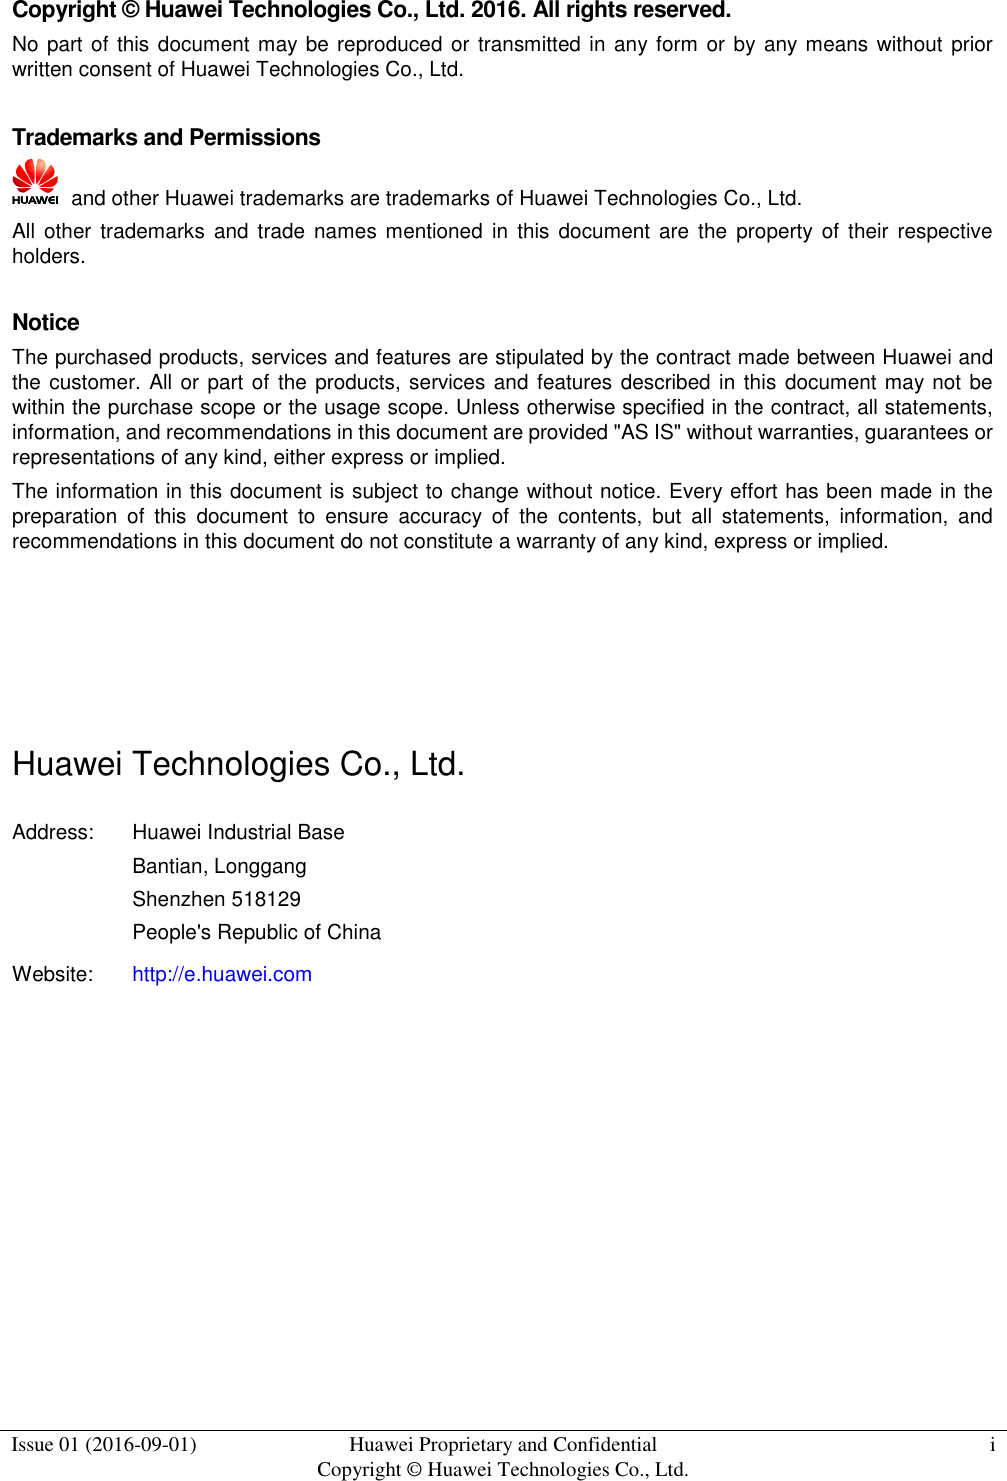  Issue 01 (2016-09-01) Huawei Proprietary and Confidential                                     Copyright © Huawei Technologies Co., Ltd. i    Copyright © Huawei Technologies Co., Ltd. 2016. All rights reserved. No part of this document may be reproduced or transmitted in any form or by any means without prior written consent of Huawei Technologies Co., Ltd.  Trademarks and Permissions   and other Huawei trademarks are trademarks of Huawei Technologies Co., Ltd. All other  trademarks  and  trade  names  mentioned  in  this  document  are  the  property  of  their  respective holders.  Notice The purchased products, services and features are stipulated by the contract made between Huawei and the customer.  All or part of the products, services and features described in this document may not be within the purchase scope or the usage scope. Unless otherwise specified in the contract, all statements, information, and recommendations in this document are provided &quot;AS IS&quot; without warranties, guarantees or representations of any kind, either express or implied. The information in this document is subject to change without notice. Every effort has been made in the preparation  of  this  document  to  ensure  accuracy  of  the  contents,  but  all  statements,  information,  and recommendations in this document do not constitute a warranty of any kind, express or implied.     Huawei Technologies Co., Ltd. Address: Huawei Industrial Base Bantian, Longgang Shenzhen 518129 People&apos;s Republic of China Website: http://e.huawei.com          